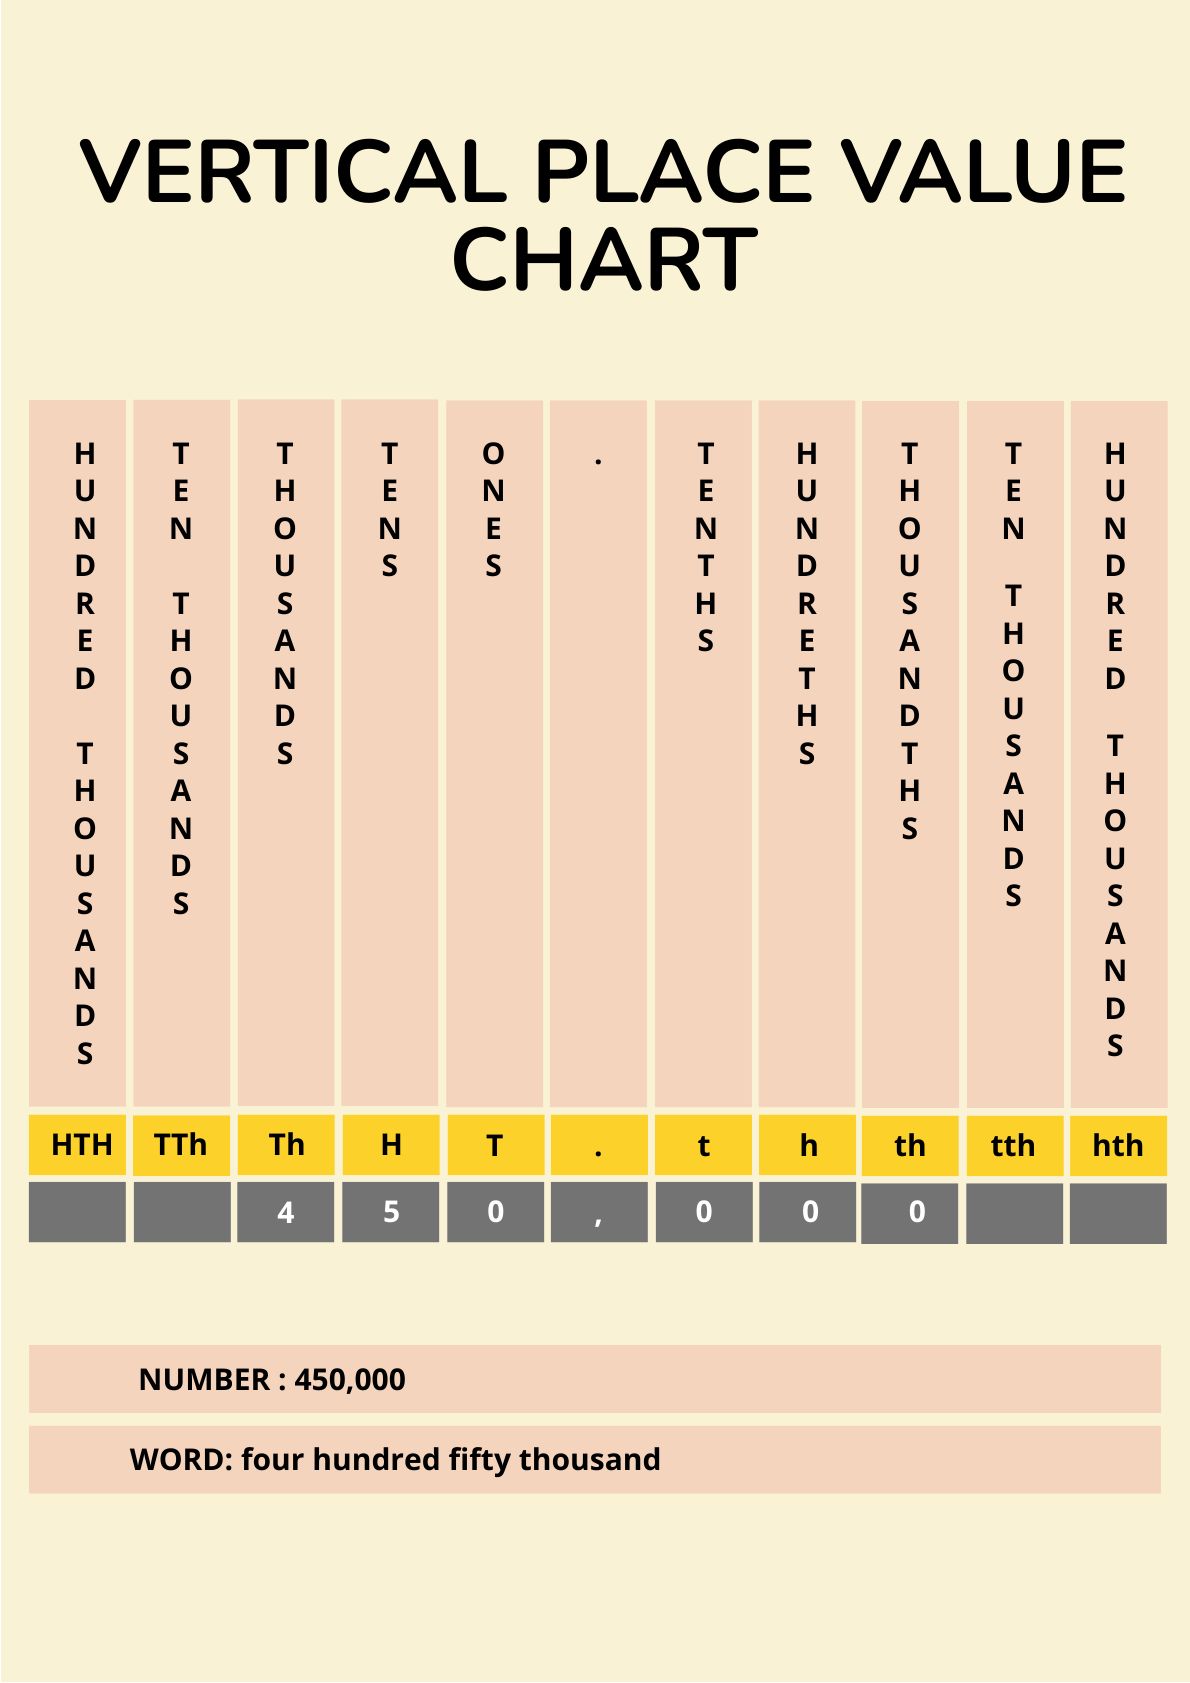 Vertical Place Value Chart in PDF, Illustrator